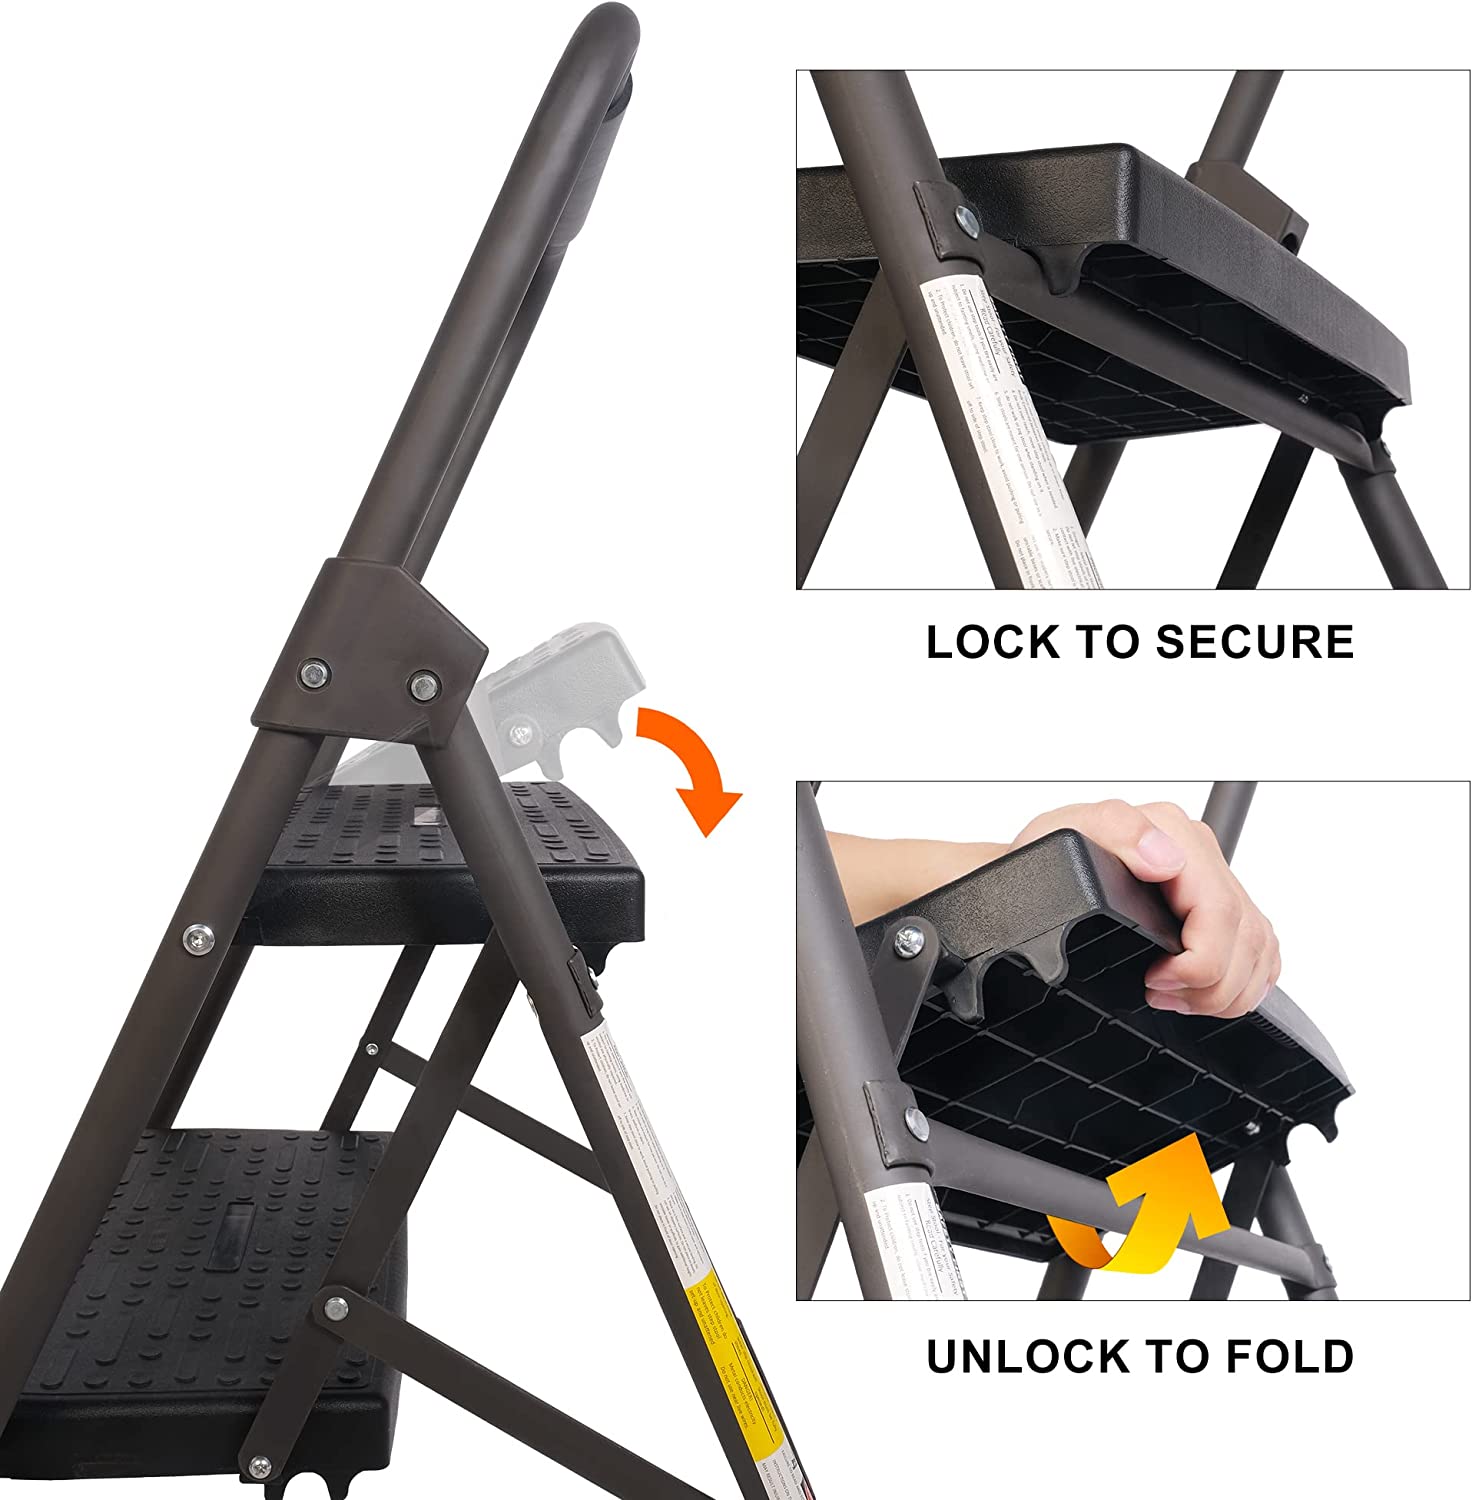 4-Step Folding Step Ladder with Wide Anti-Slip Pedal for Safety and Convenience